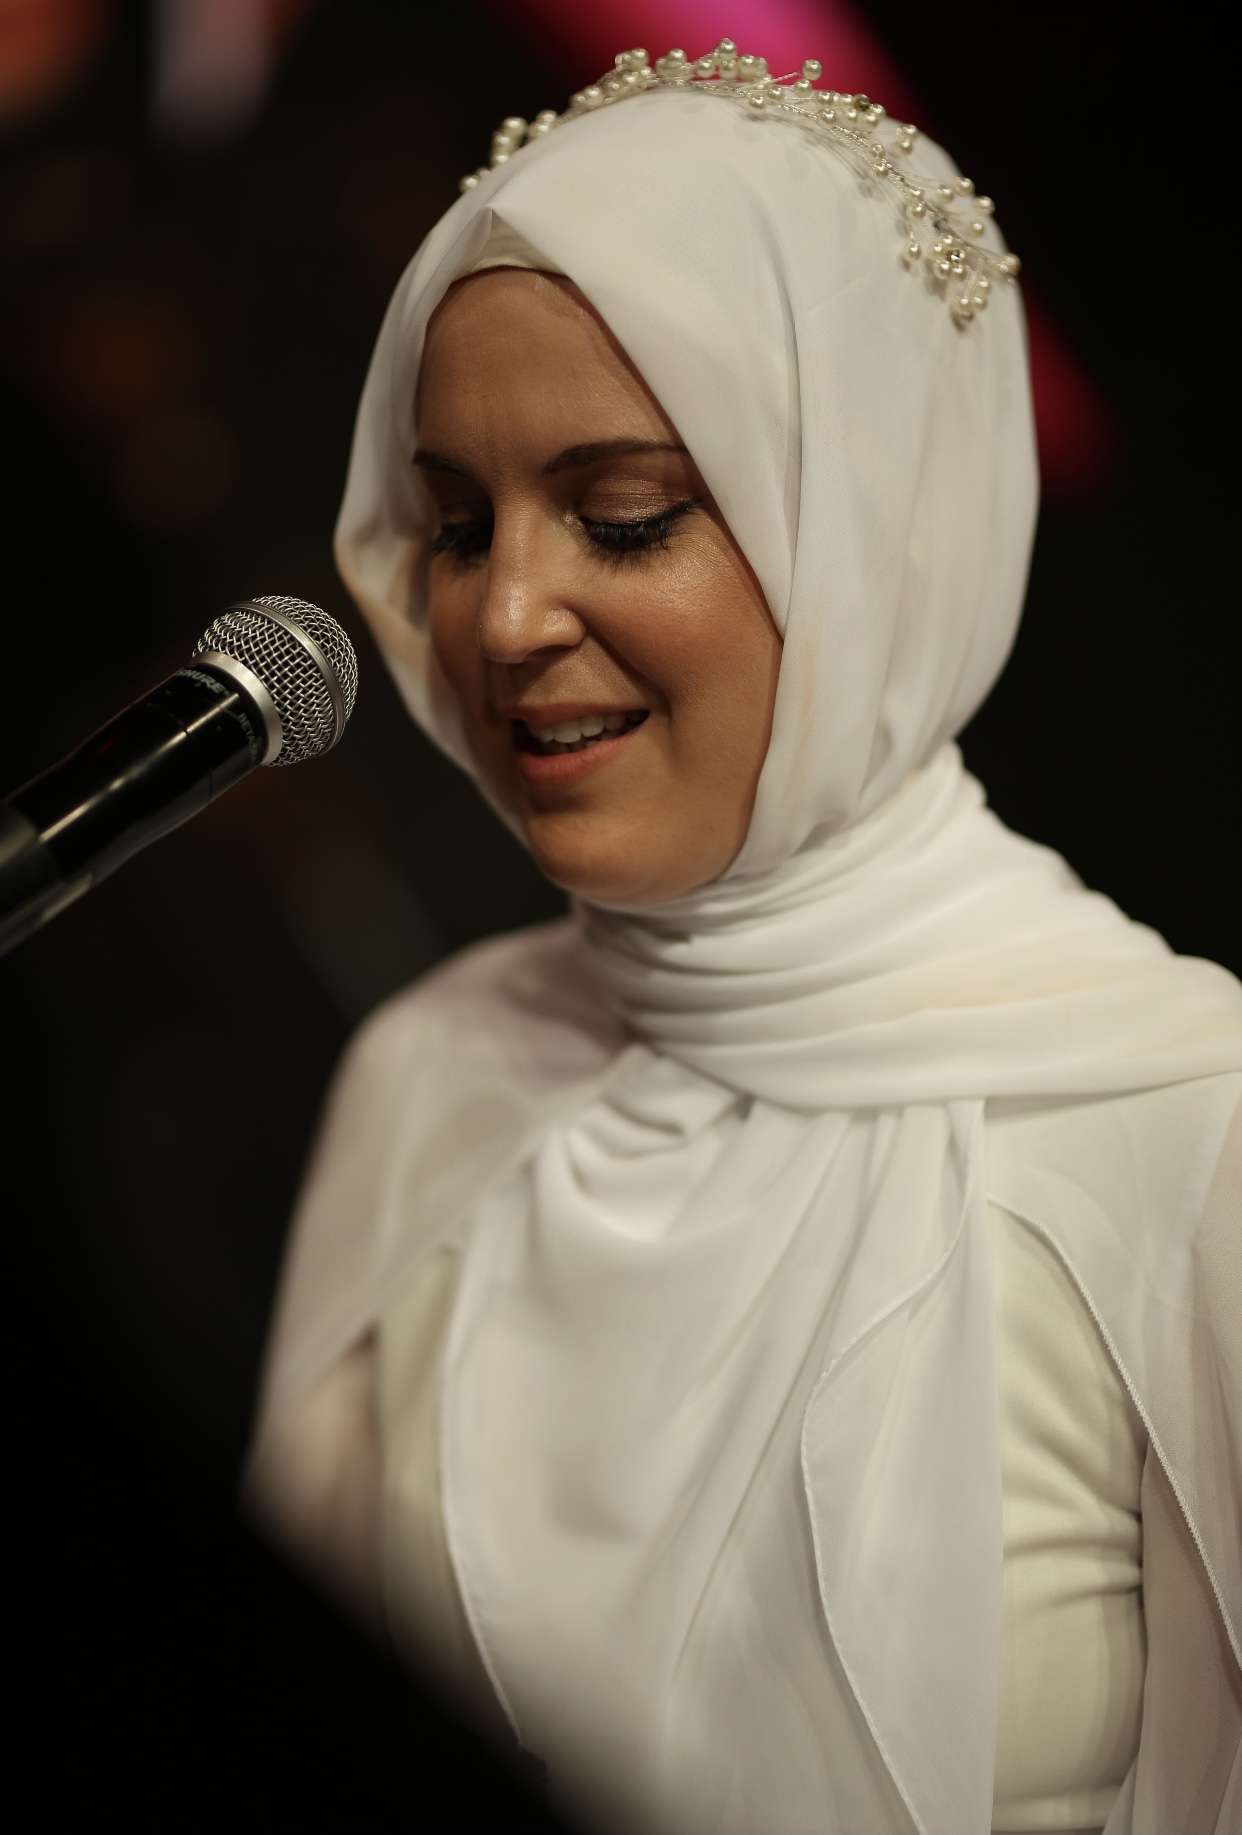 The first global Islamic entertainment platform launched with a charming British voice... Salwa Lauren